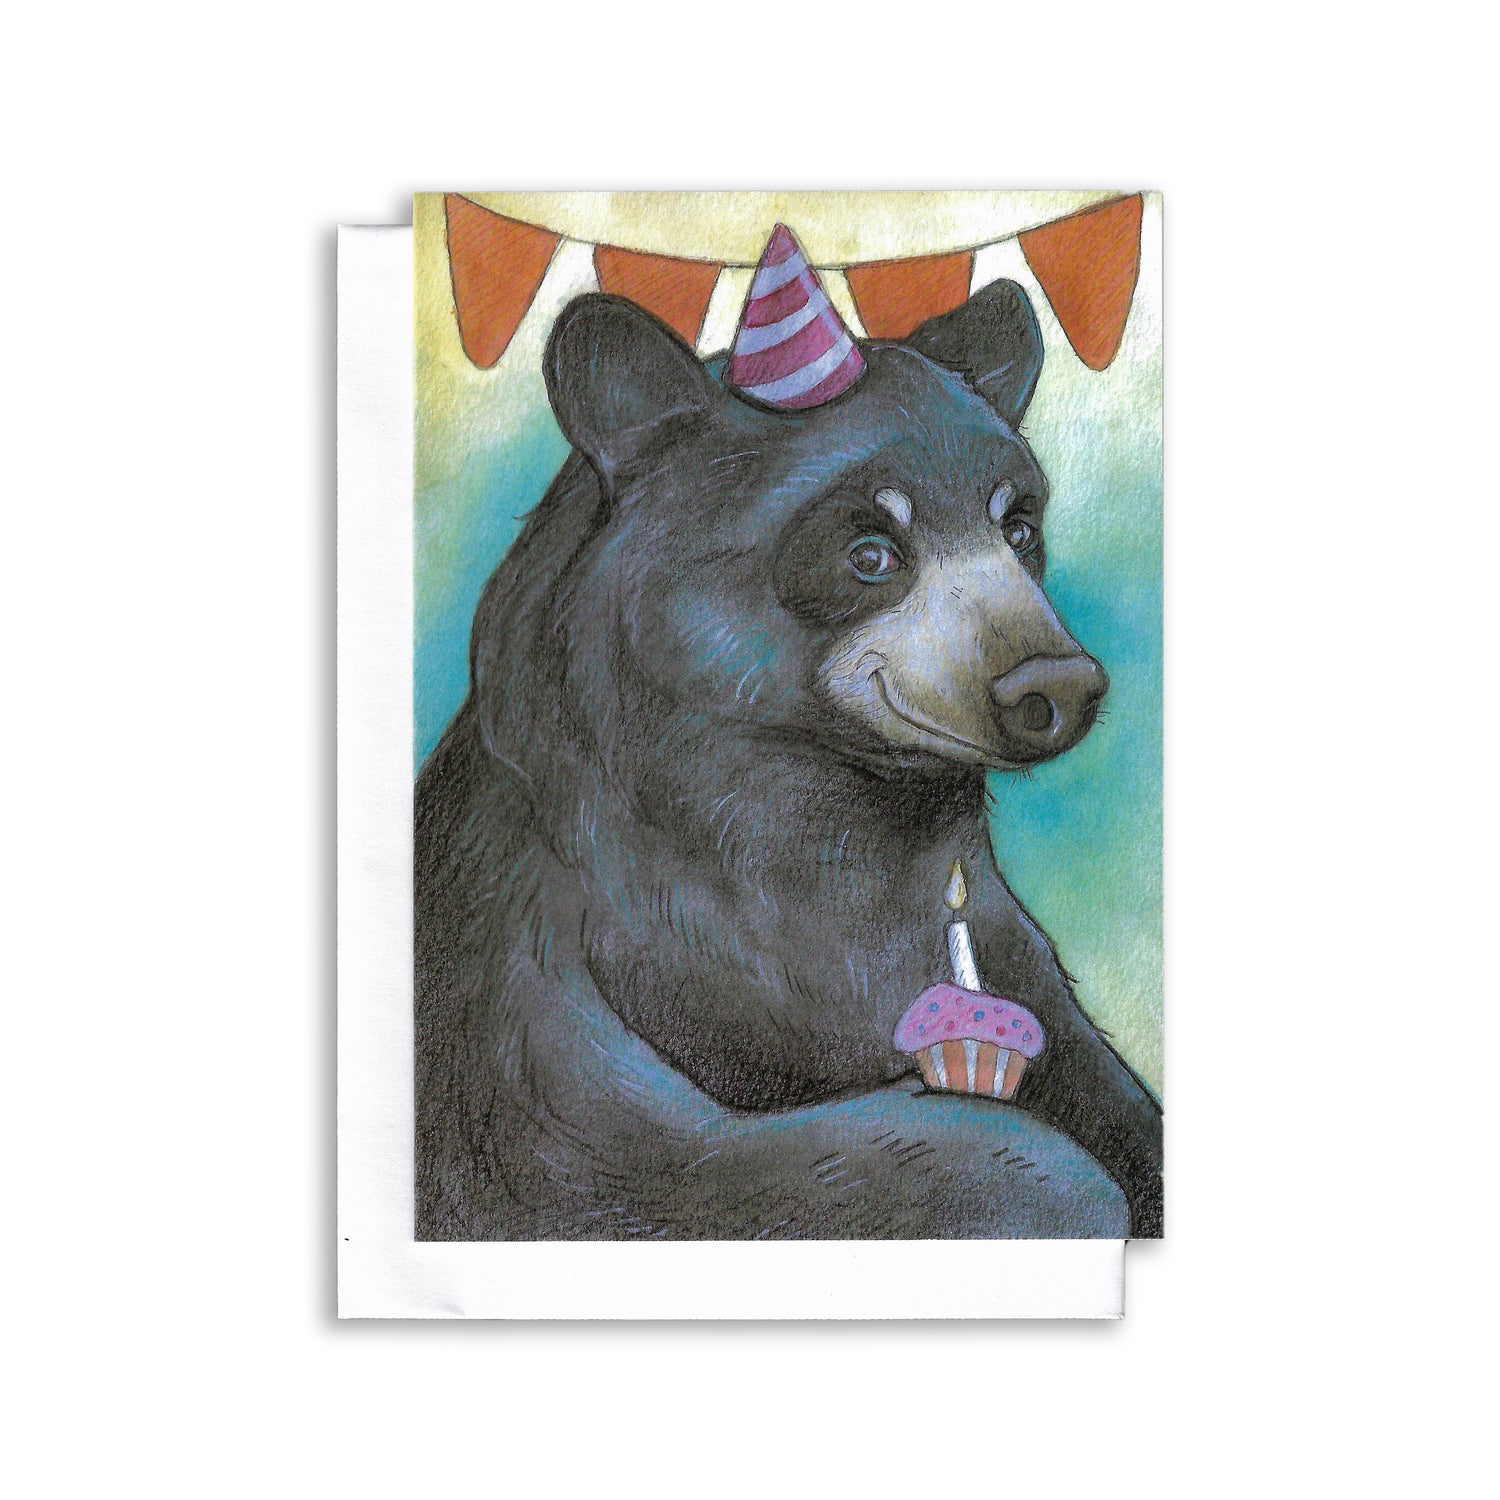 An illustrated  birthday greeting card showing a happy black bear wearing a birthday hat and holding a pink cupcake with one candle. A banner of red flags is in the background.